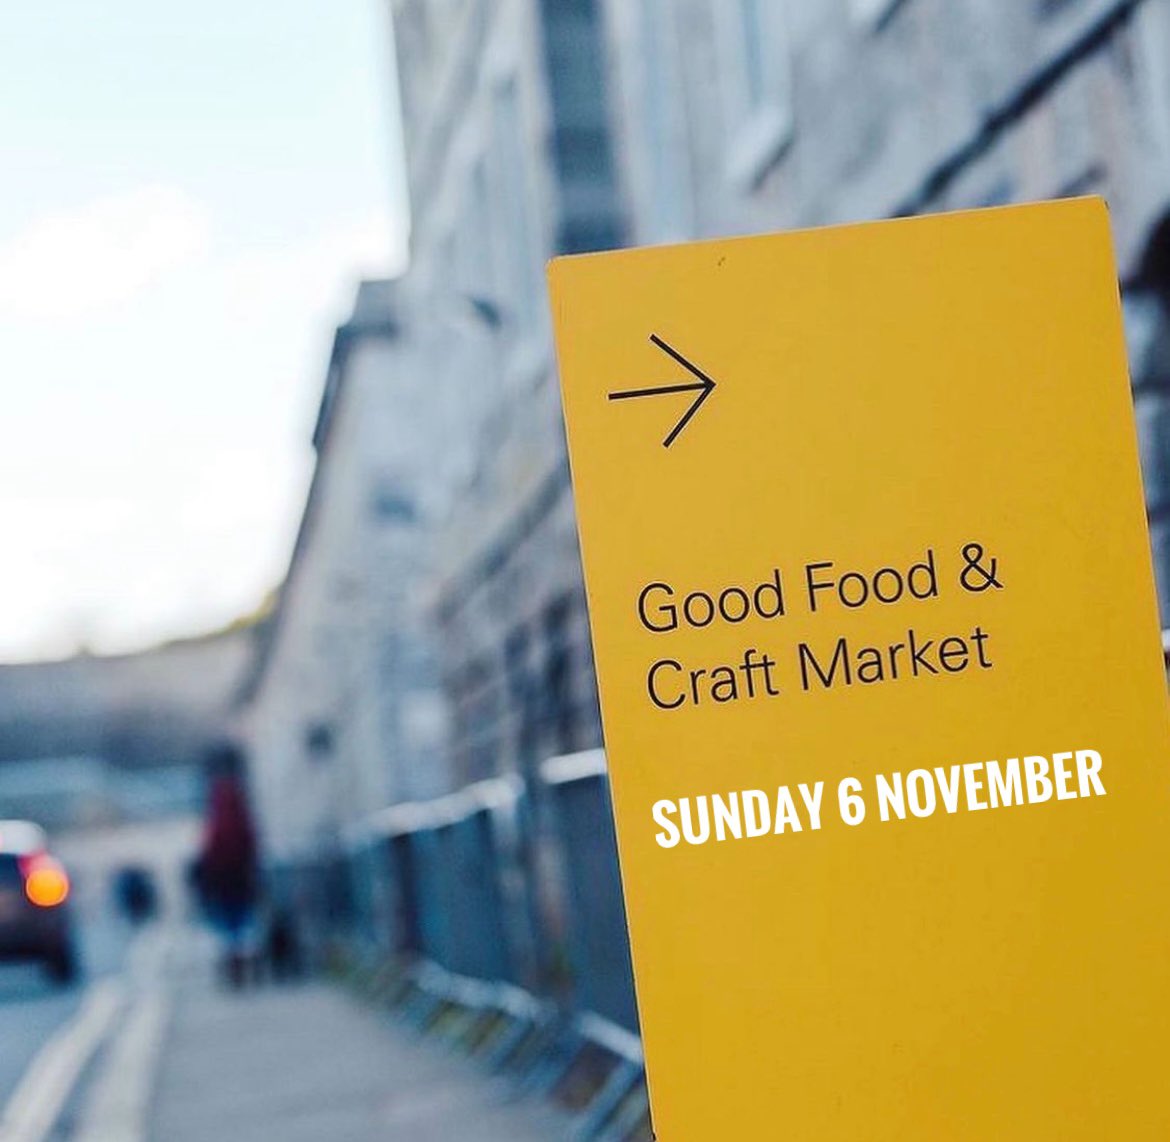 We are looking forward to being back @RoyalWilliamYd good food & craft market a week today on Sunday 6 November! #plymouth @visitplymouth @WhatsOnPlymouth @plymouthtoday1 @britainsocean @sdevonbiz @visitsouthdevon #royalwilliamyard